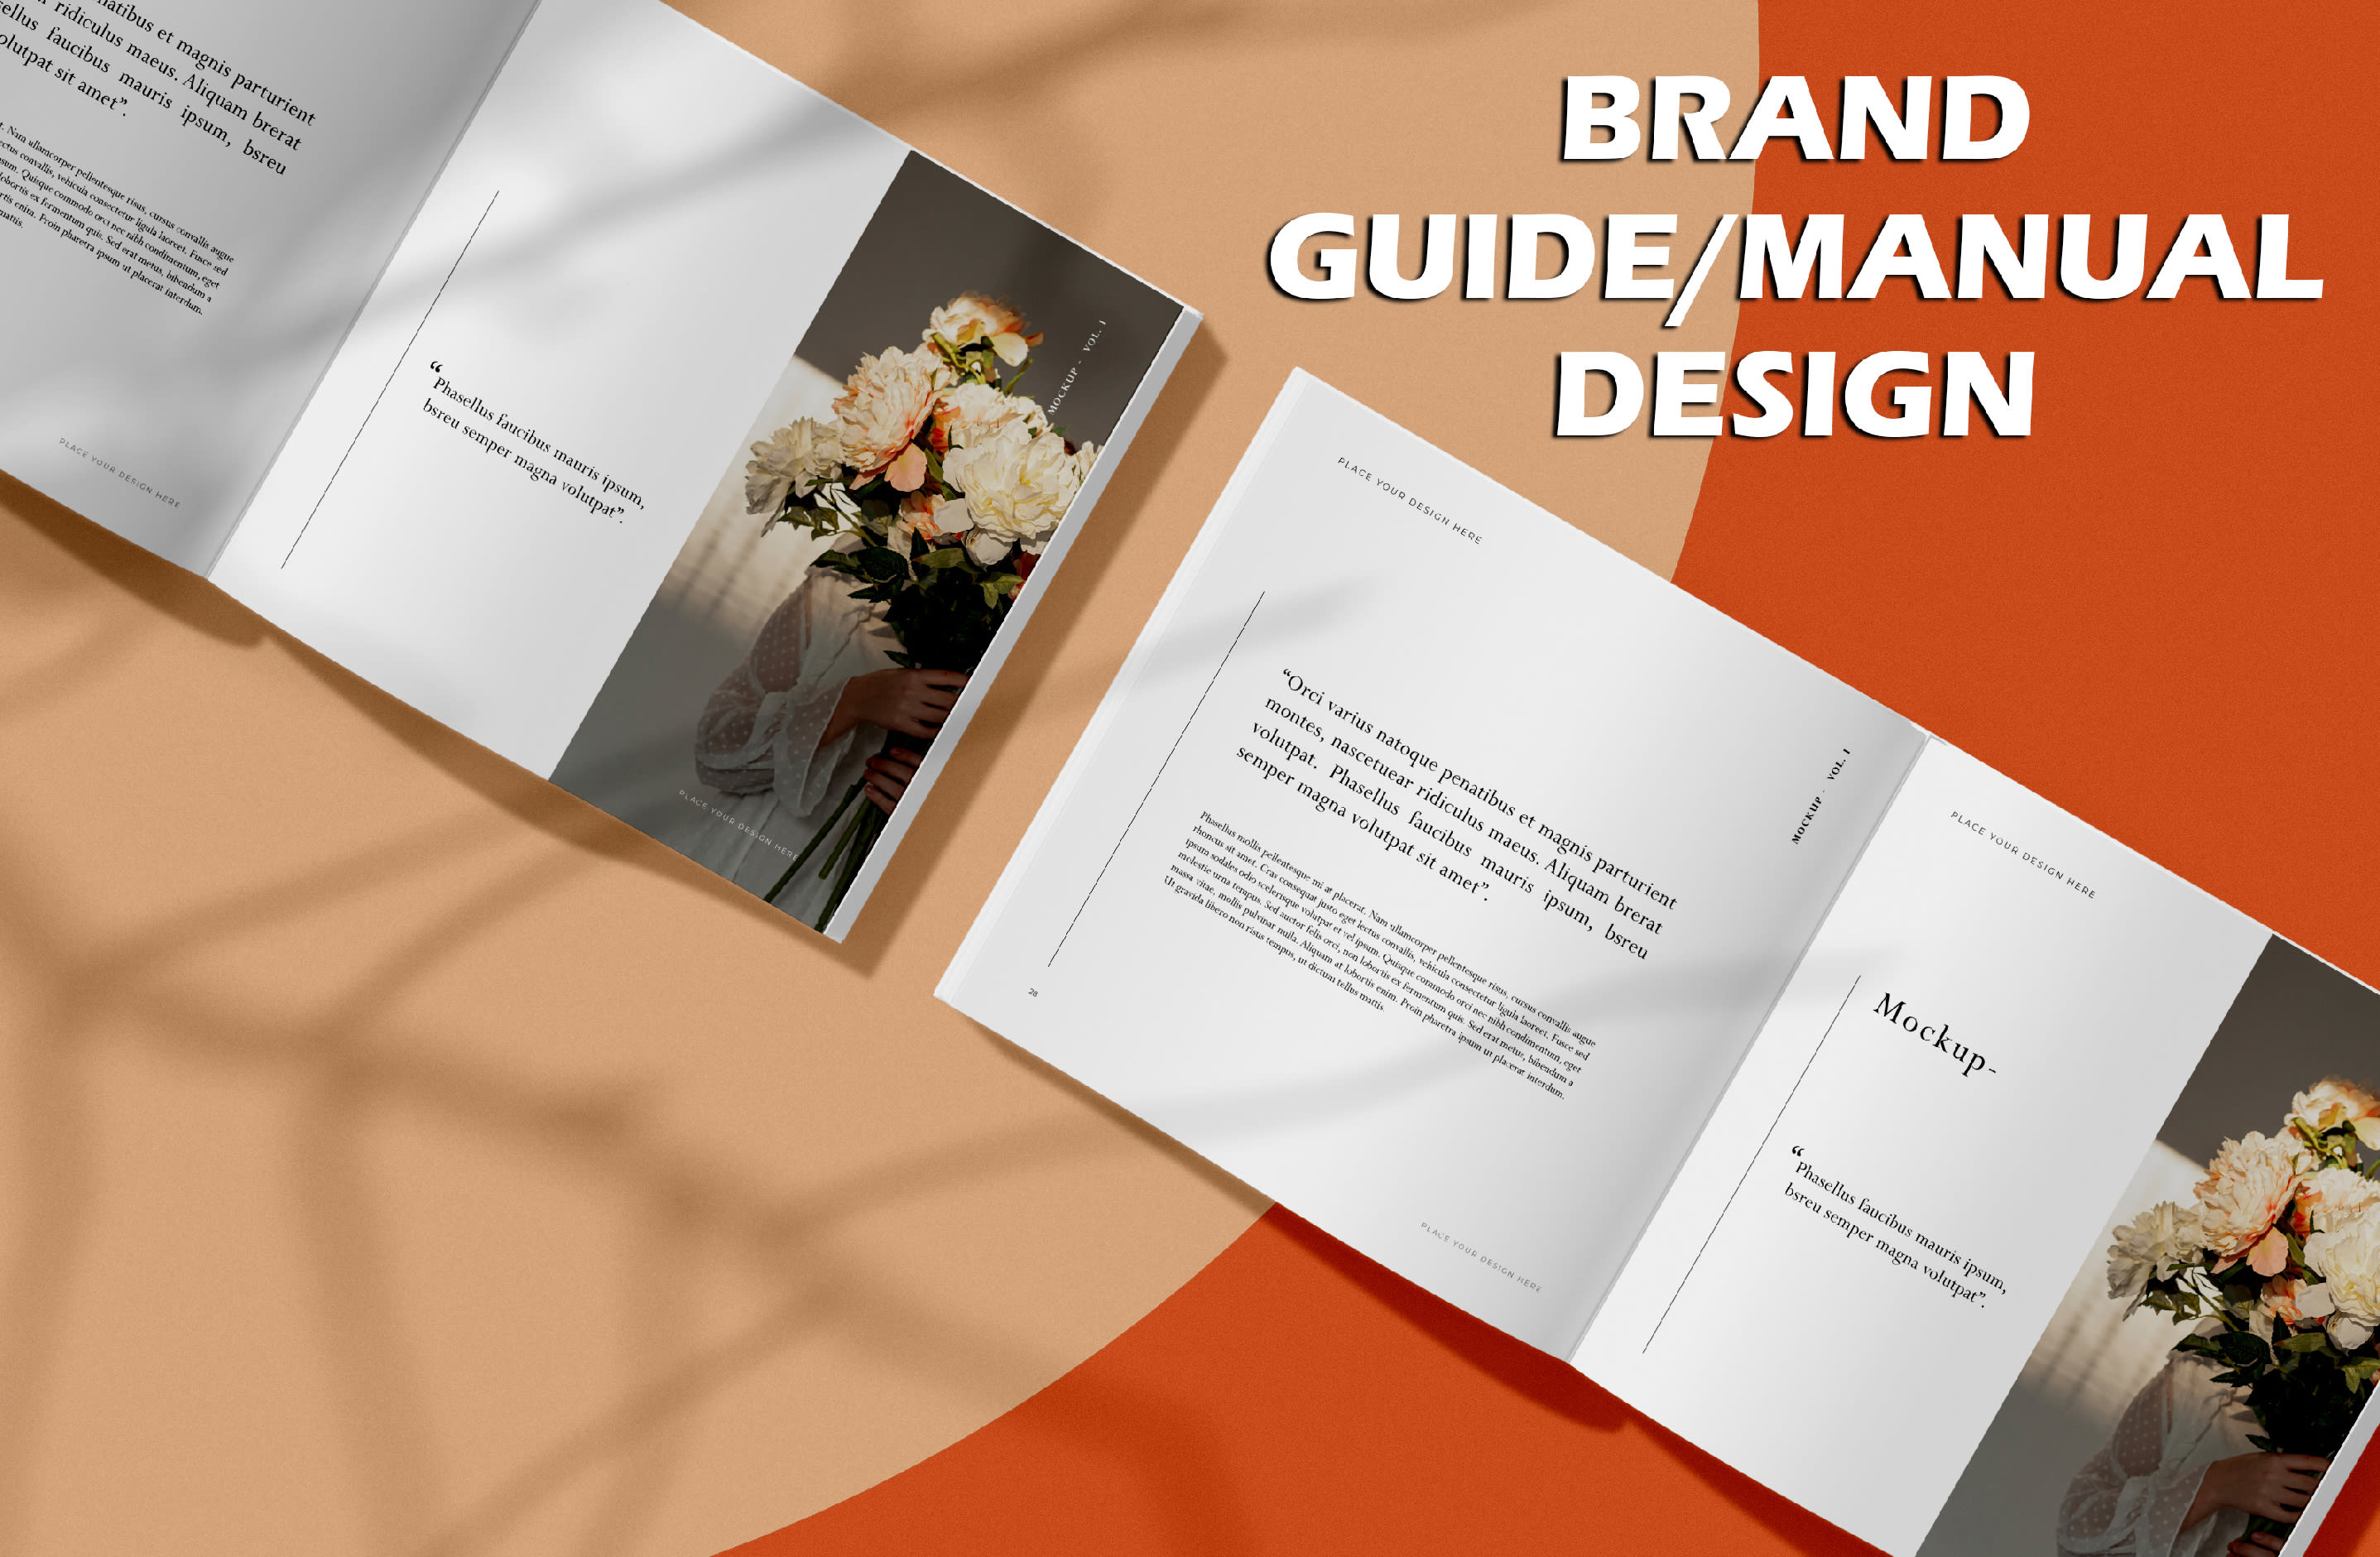 Download Design Brand Manual And Brand Style Guide For Your Business By Designsbylyba Fiverr